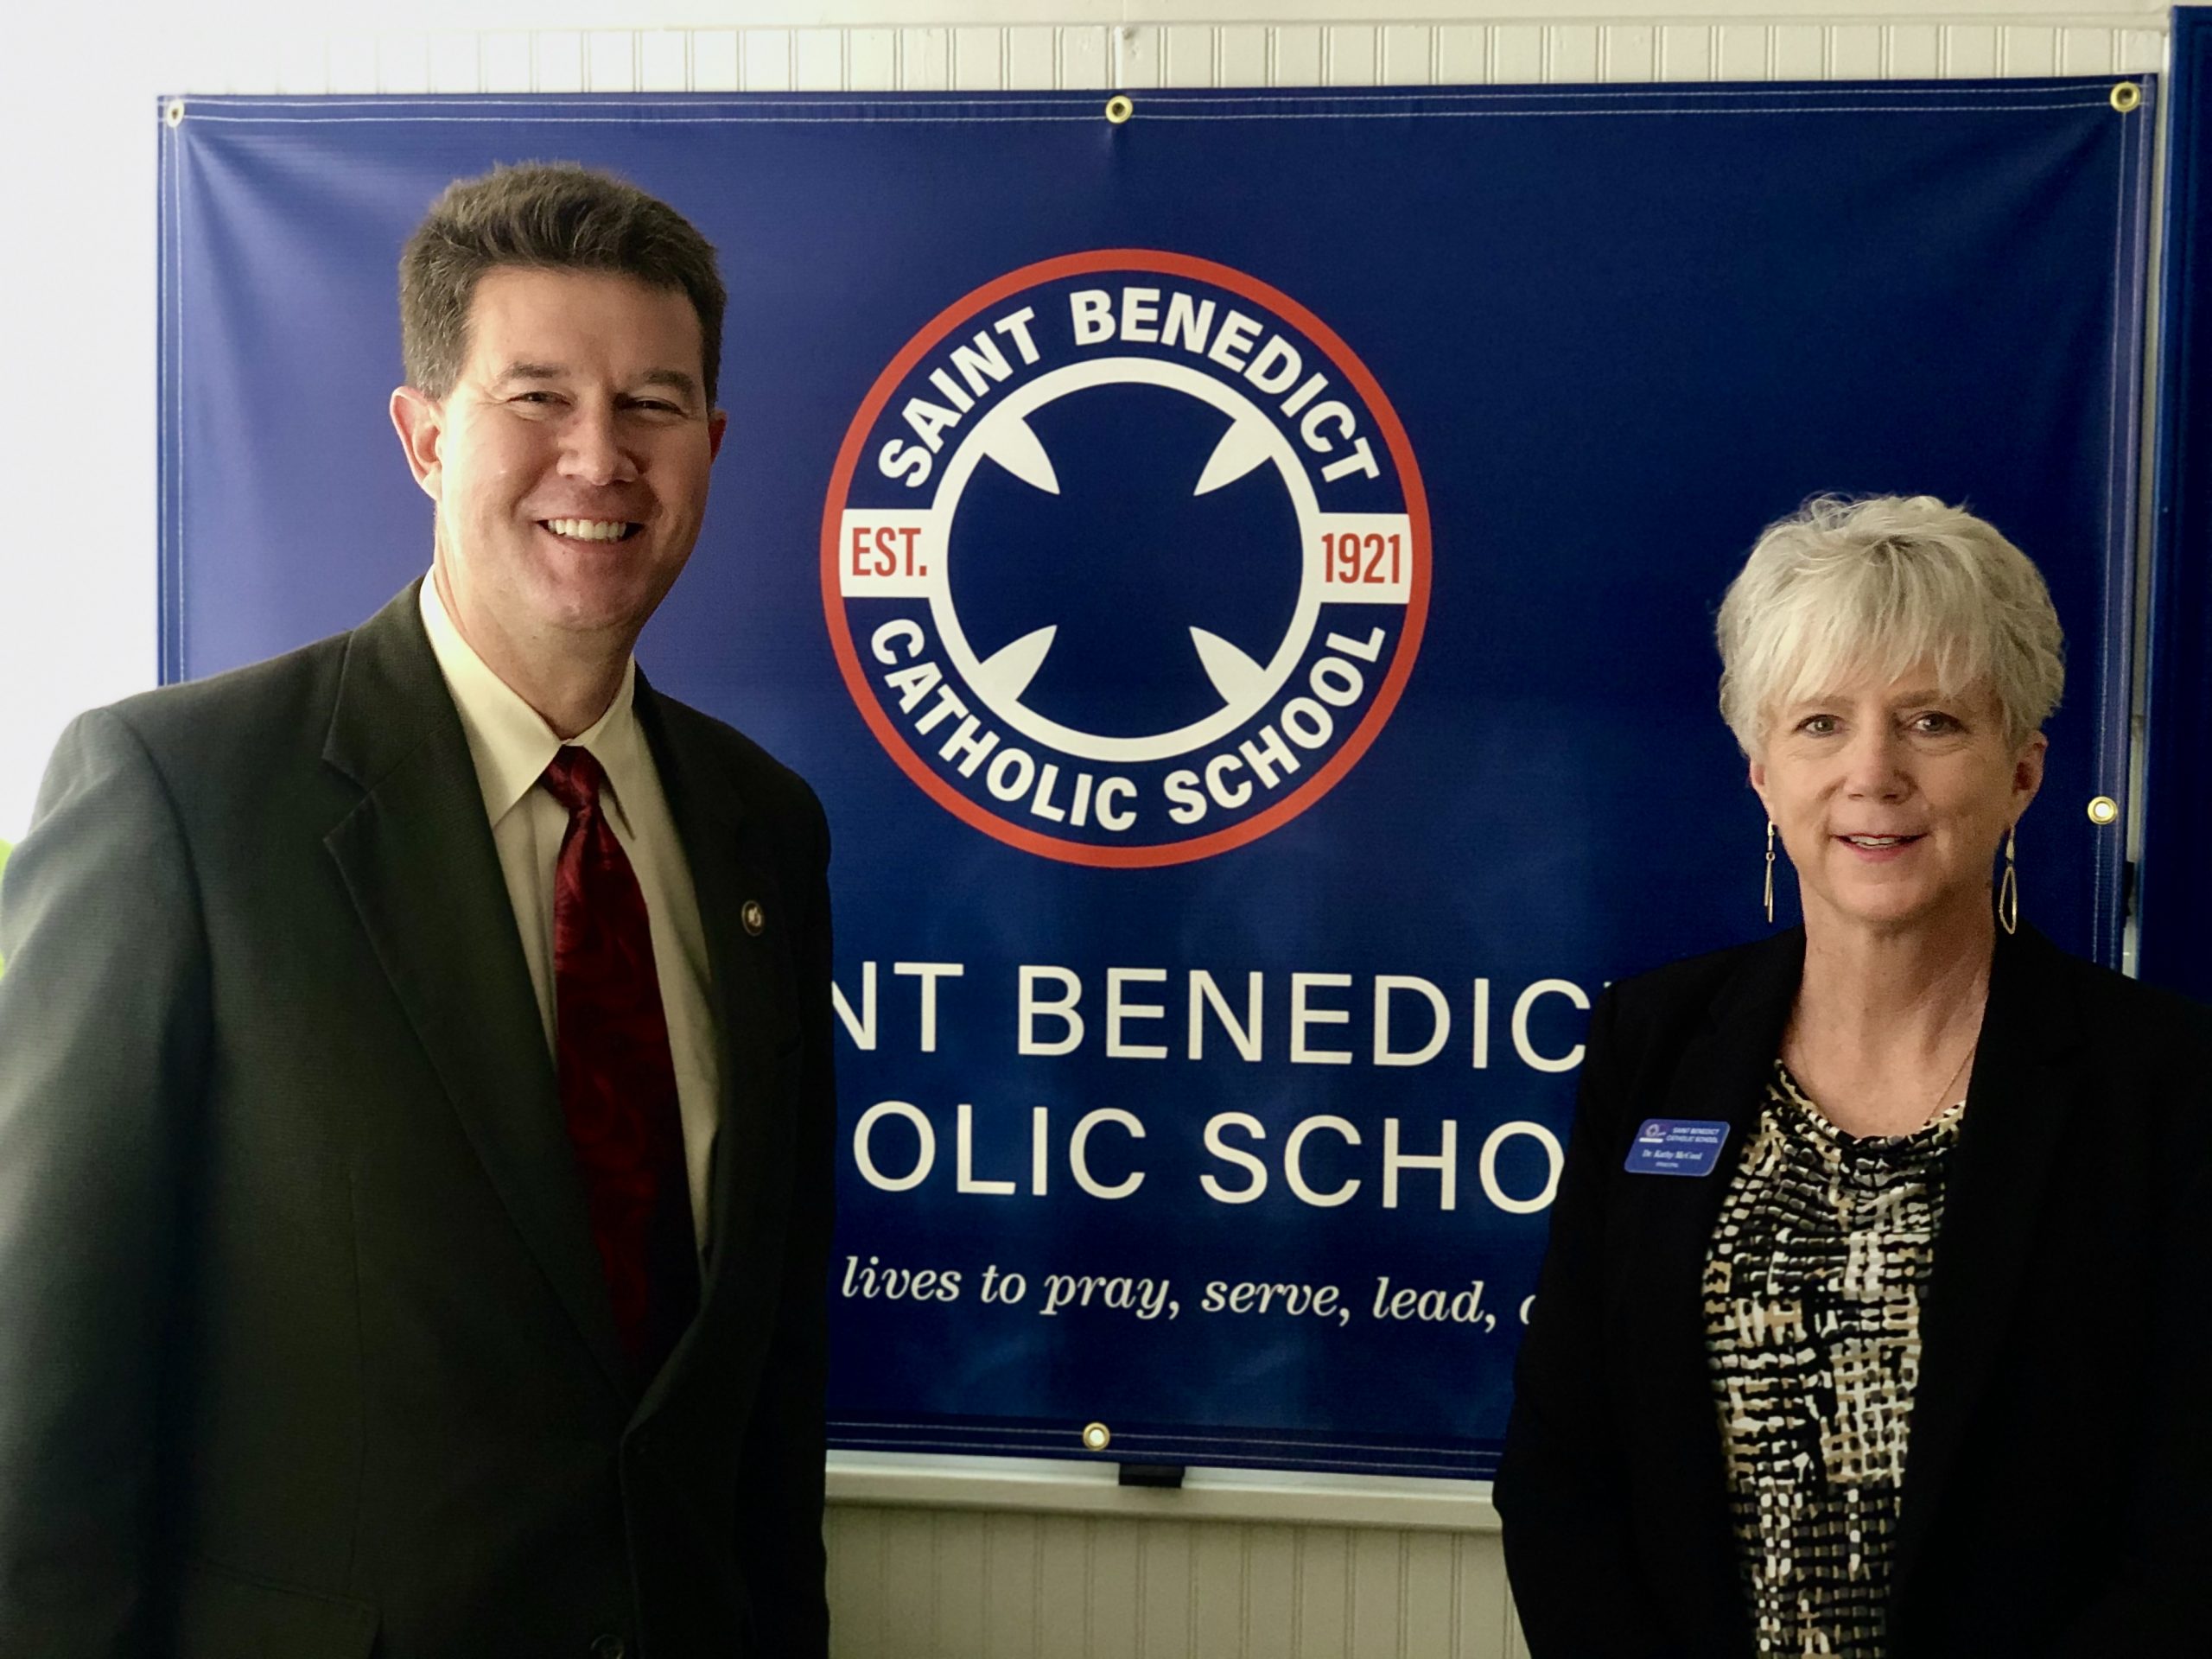 Pictured: The Honorable Alabama Secretary of State John H. Merrill and St. Benedict Principal Dr. Kathy McCool